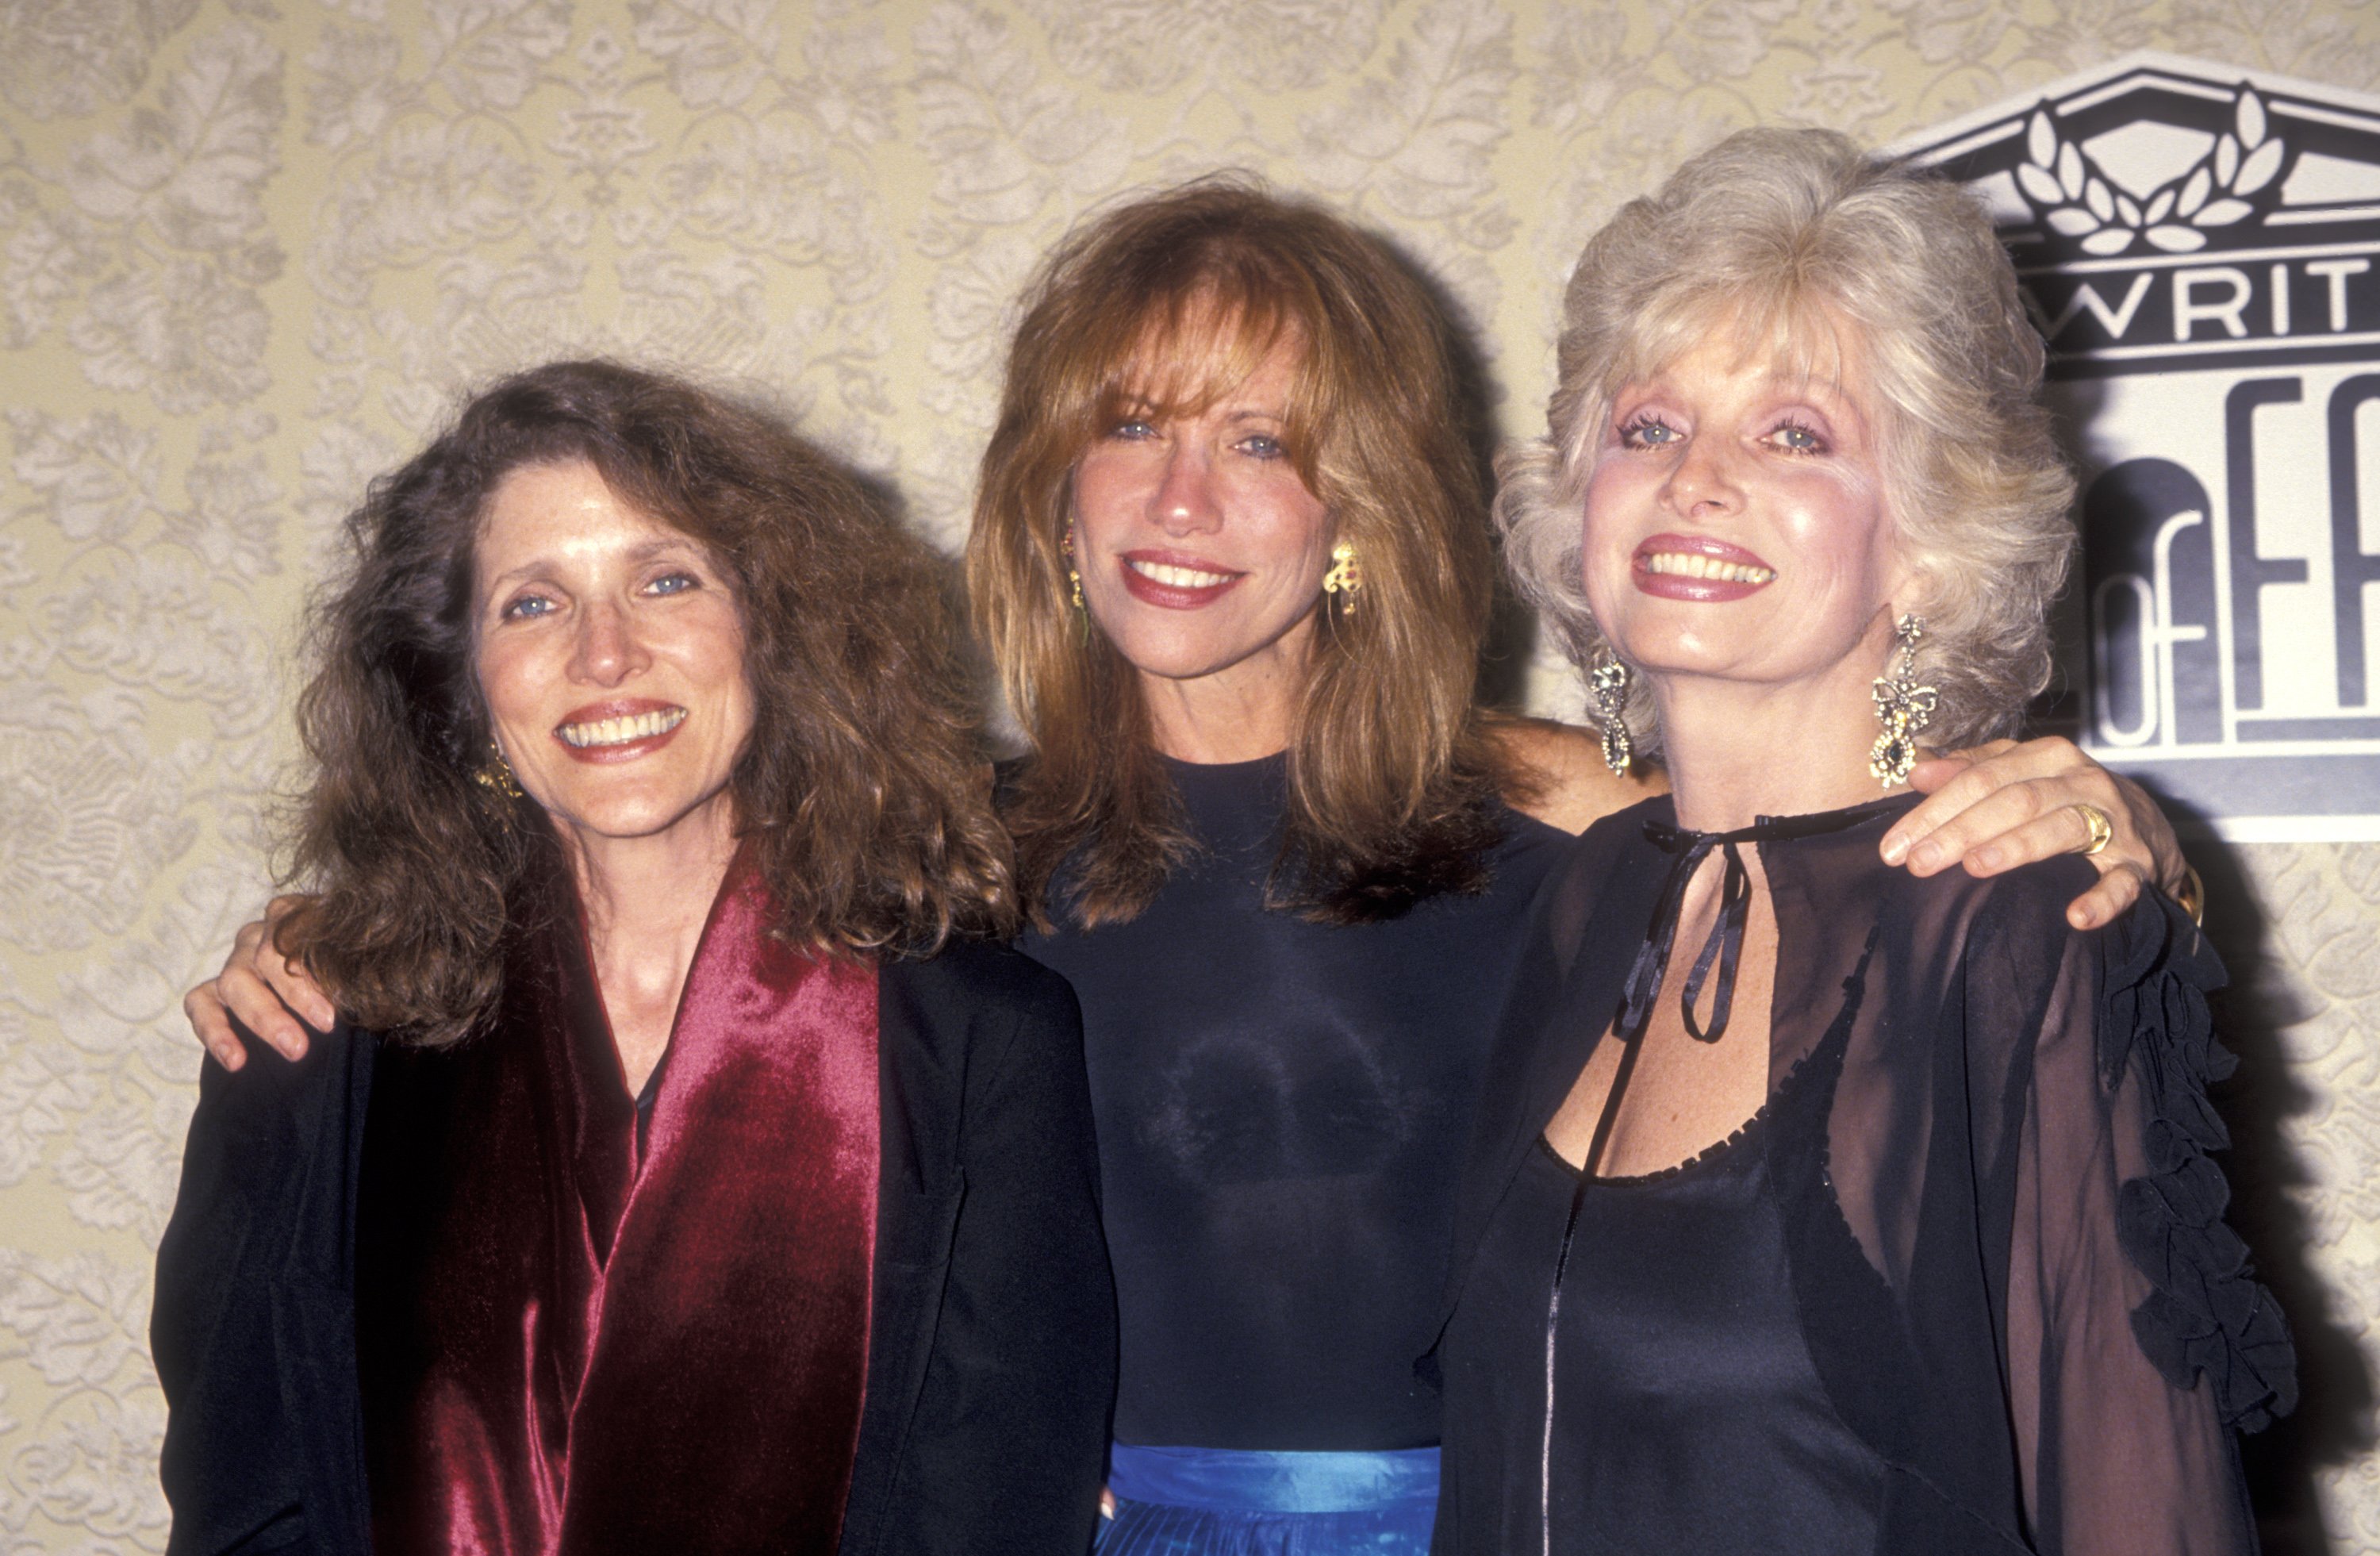 Musician Carly Simon and sisters Lucy Simon and Joanna Simon attend The National Academy of Popular Music's 25th Annual Songwriters Hall of Fame Induction Ceremony at Sheraton New York Hotel and Towers on June 1, 1994 in New York City ┃Source: Getty Images